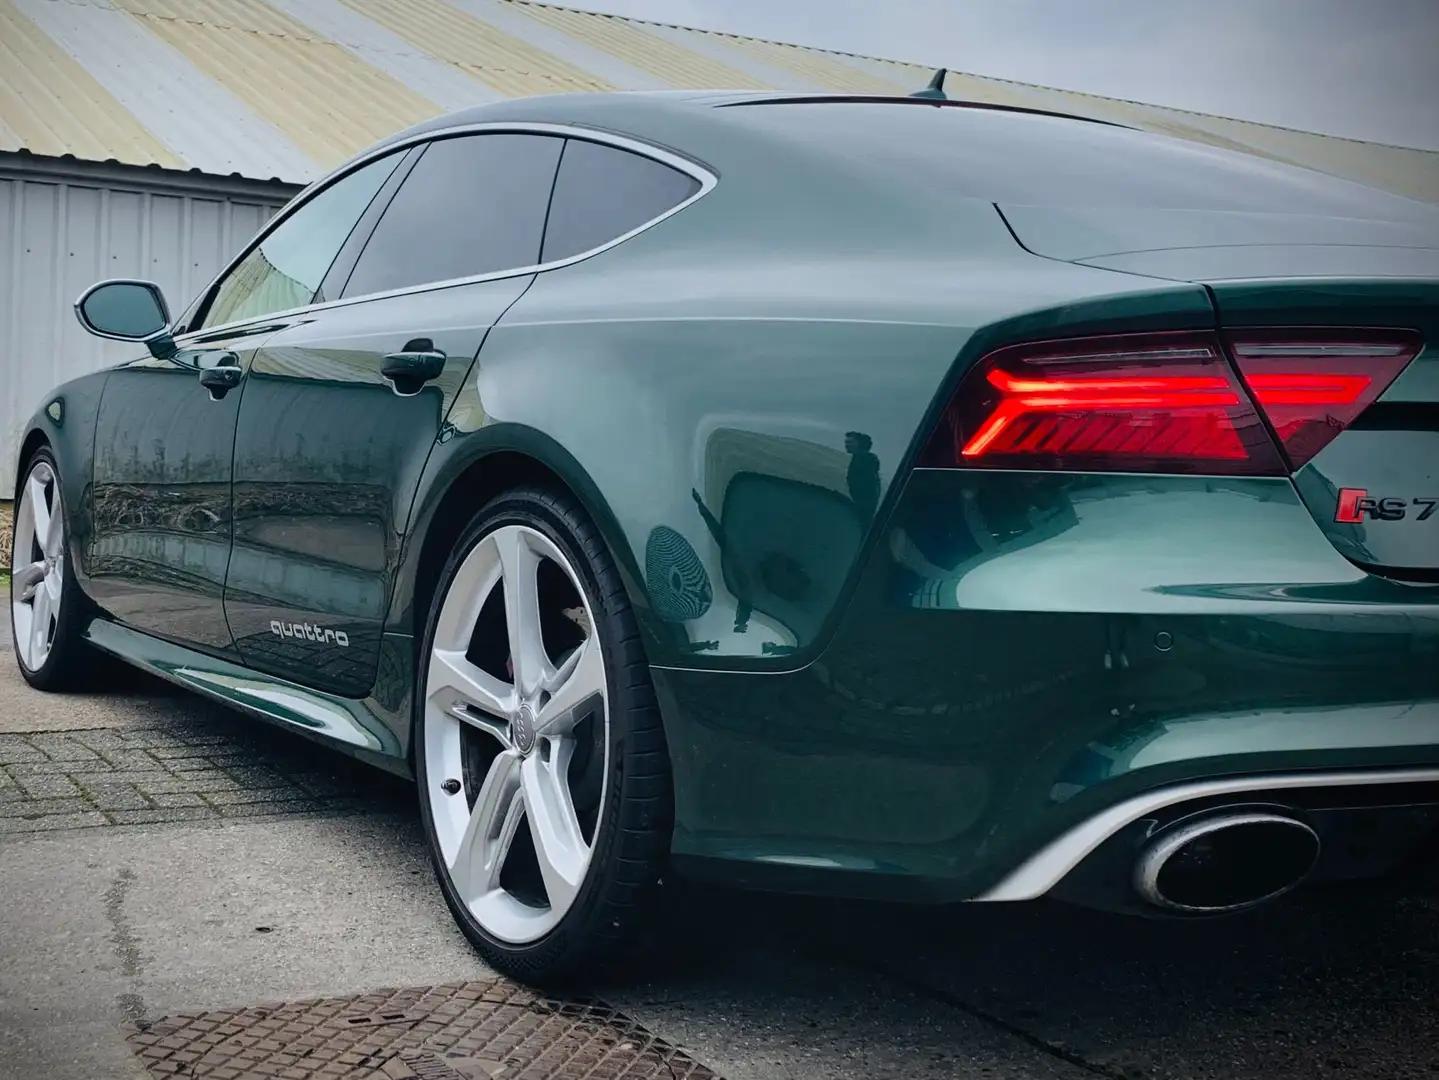 Audi RS7 Verdant Green - Audi Exclusive - from collector Vert - 2